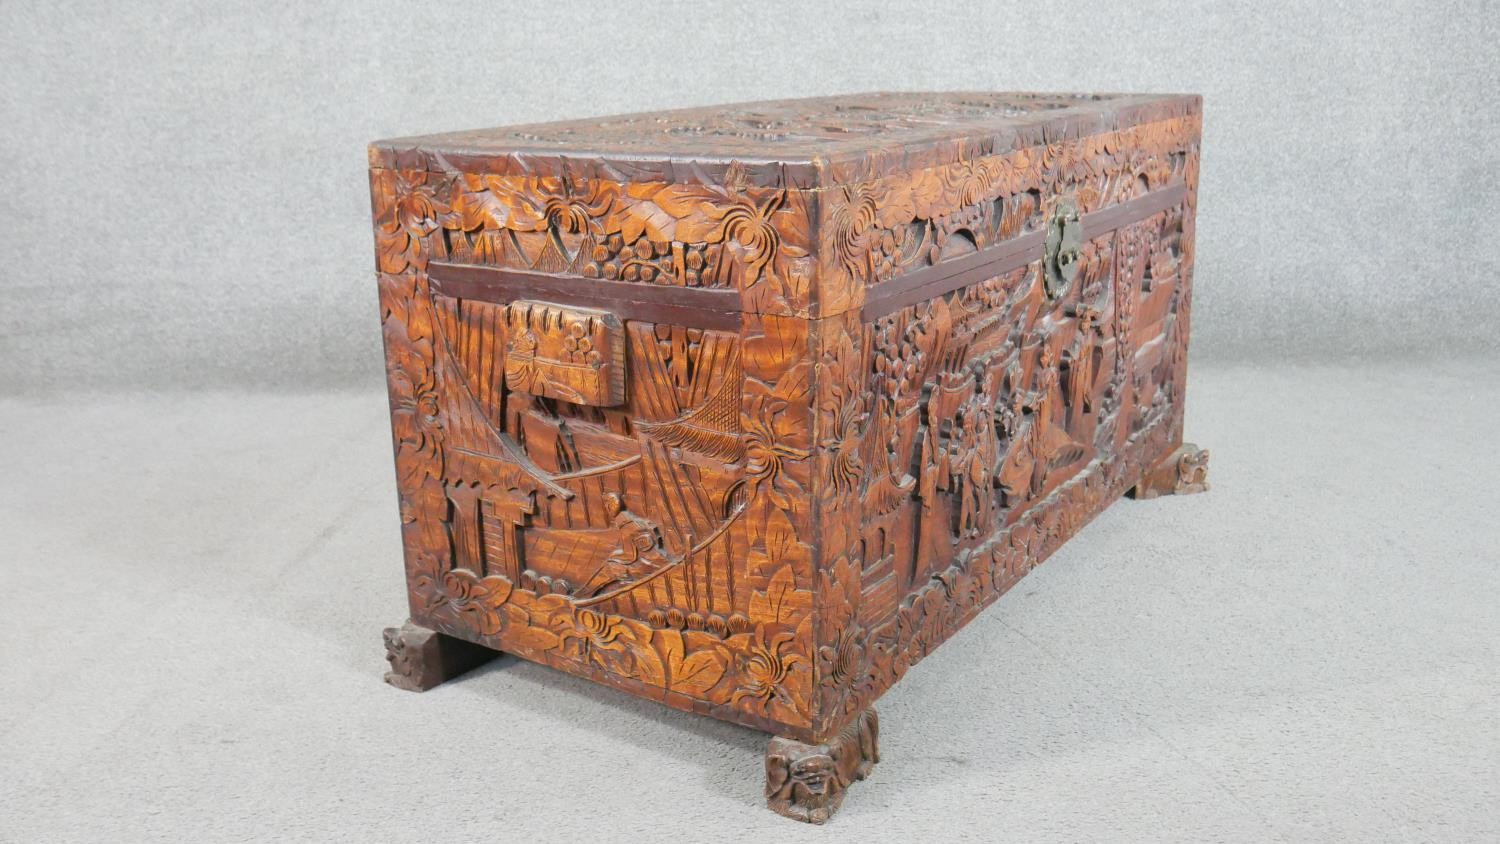 A 20th century Chinese camphorwood coffer, of rectangular form, the lid and sides ornately carved - Image 8 of 9